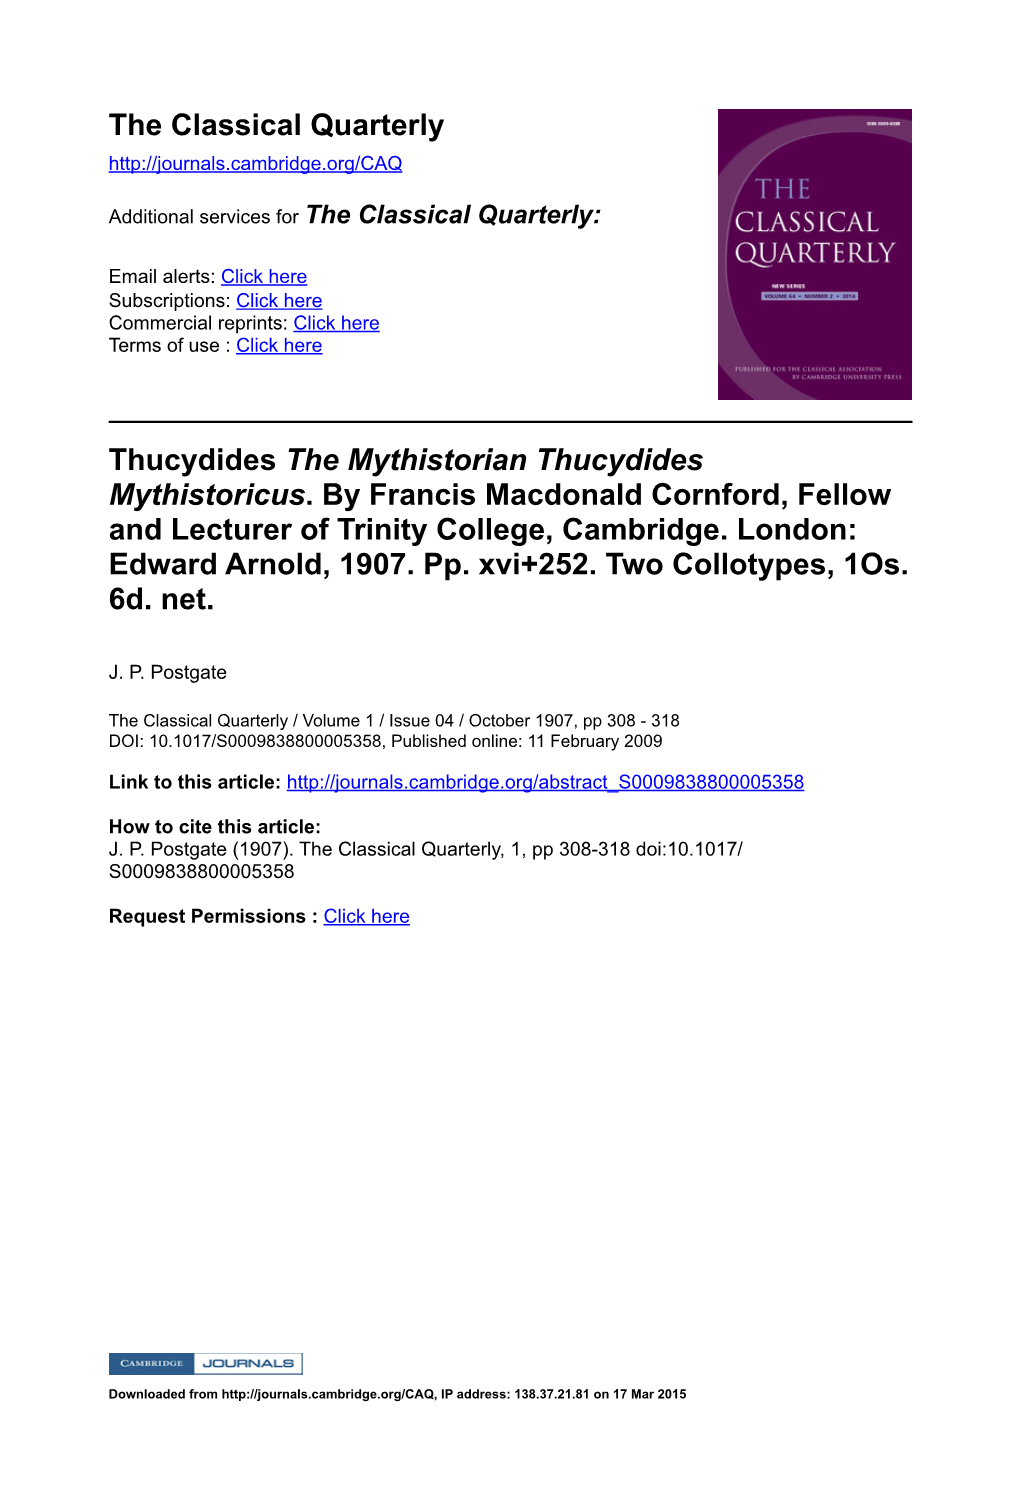 Thucydides the Mythistorian Thucydides Mythistoricus. by Francis Macdonald Cornford, Fellow and Lecturer of Trinity College, Cambridge